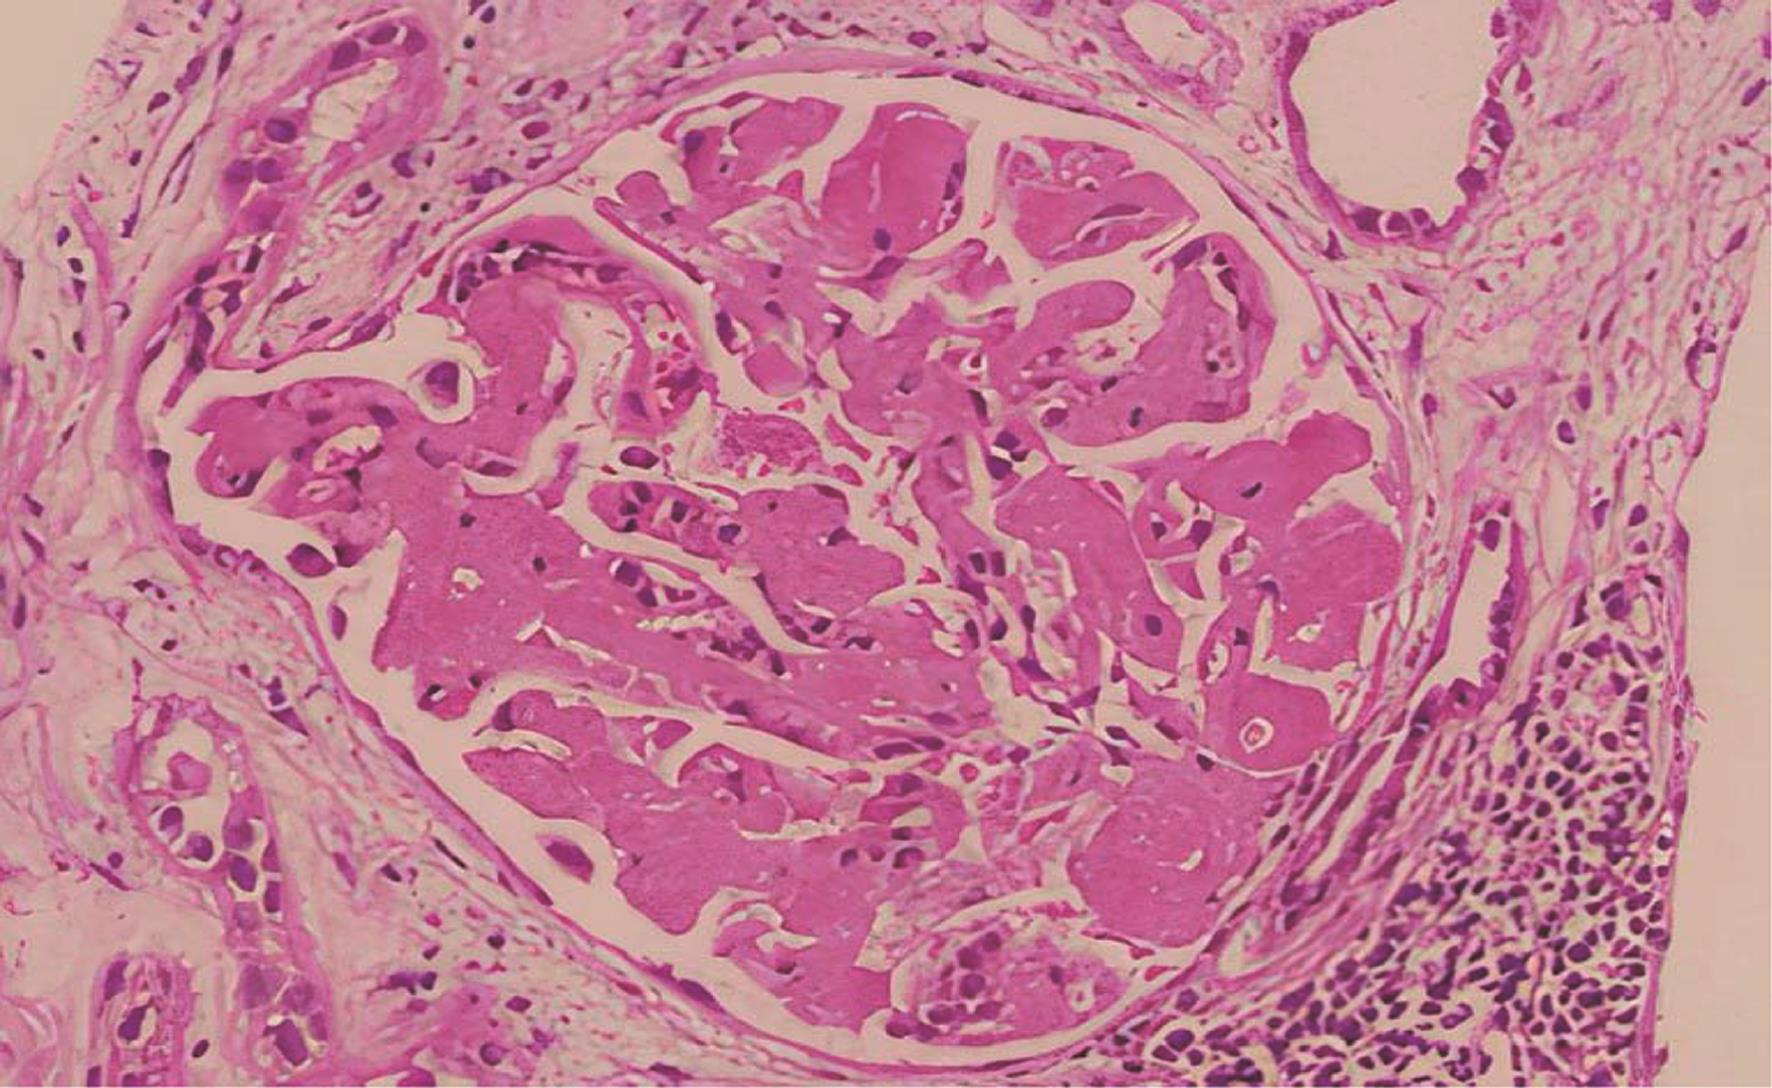 Pathological findings of biopsied renal tissue.